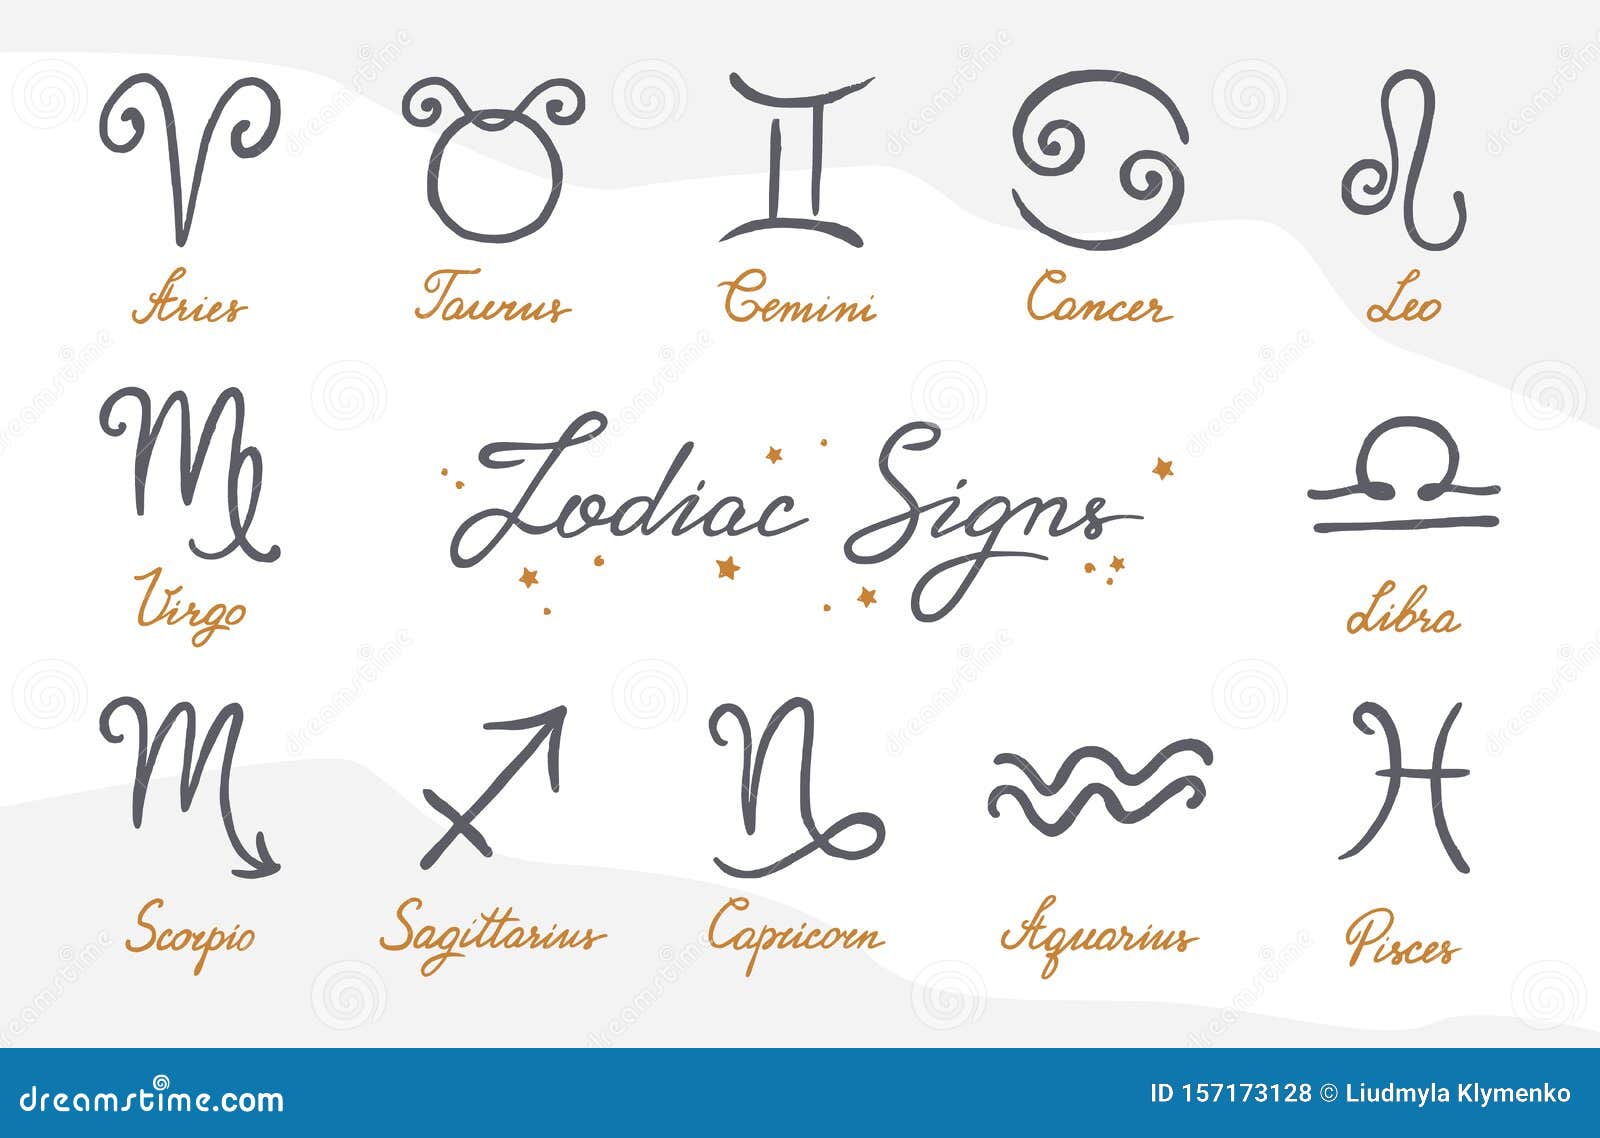 Vector Set of Hand-drawn Zodiac Signs Icons on Various Backgrounds ...